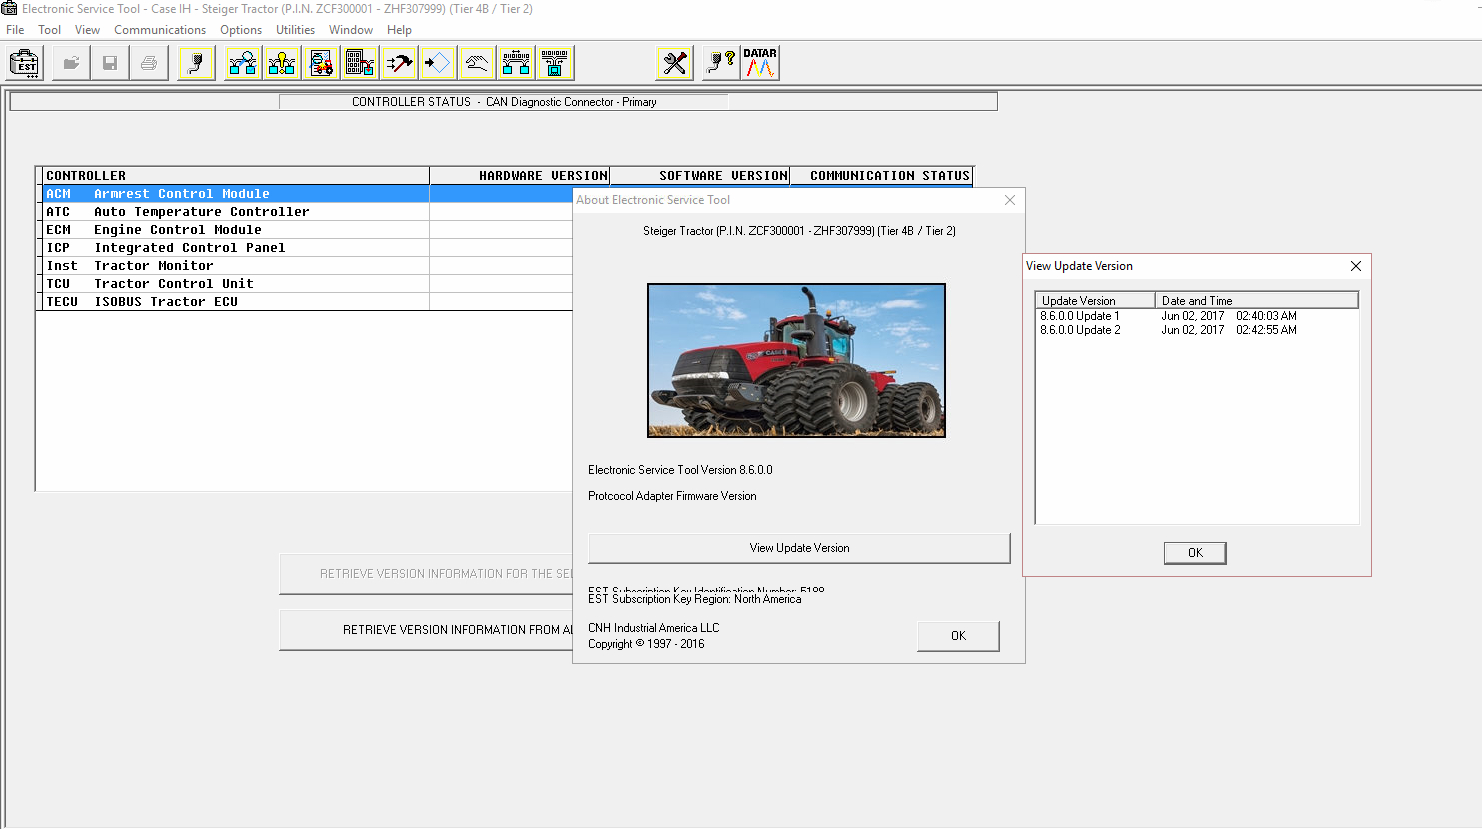 Dearborn Protocol Adapter 5 (DAP5 white interface) full New interface for New holland and Case-1